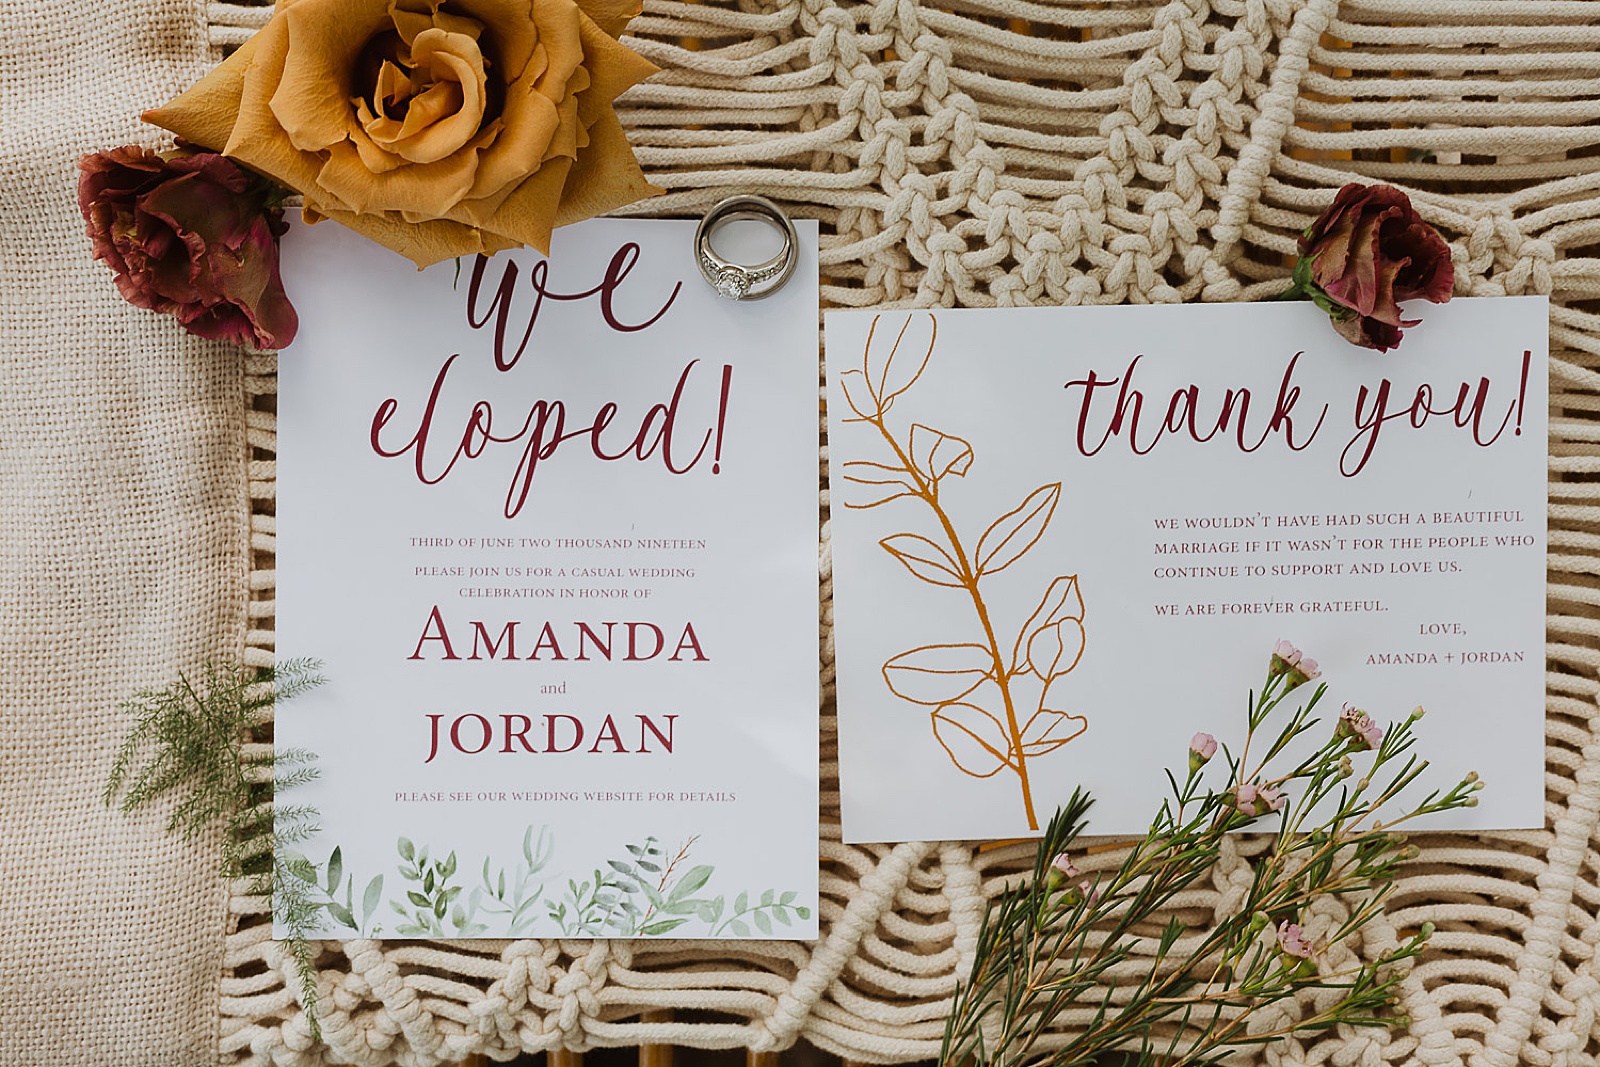 Invitation Suite in Boho Kansas City Styled Elopement captured by Caitlyn Cloud Photography